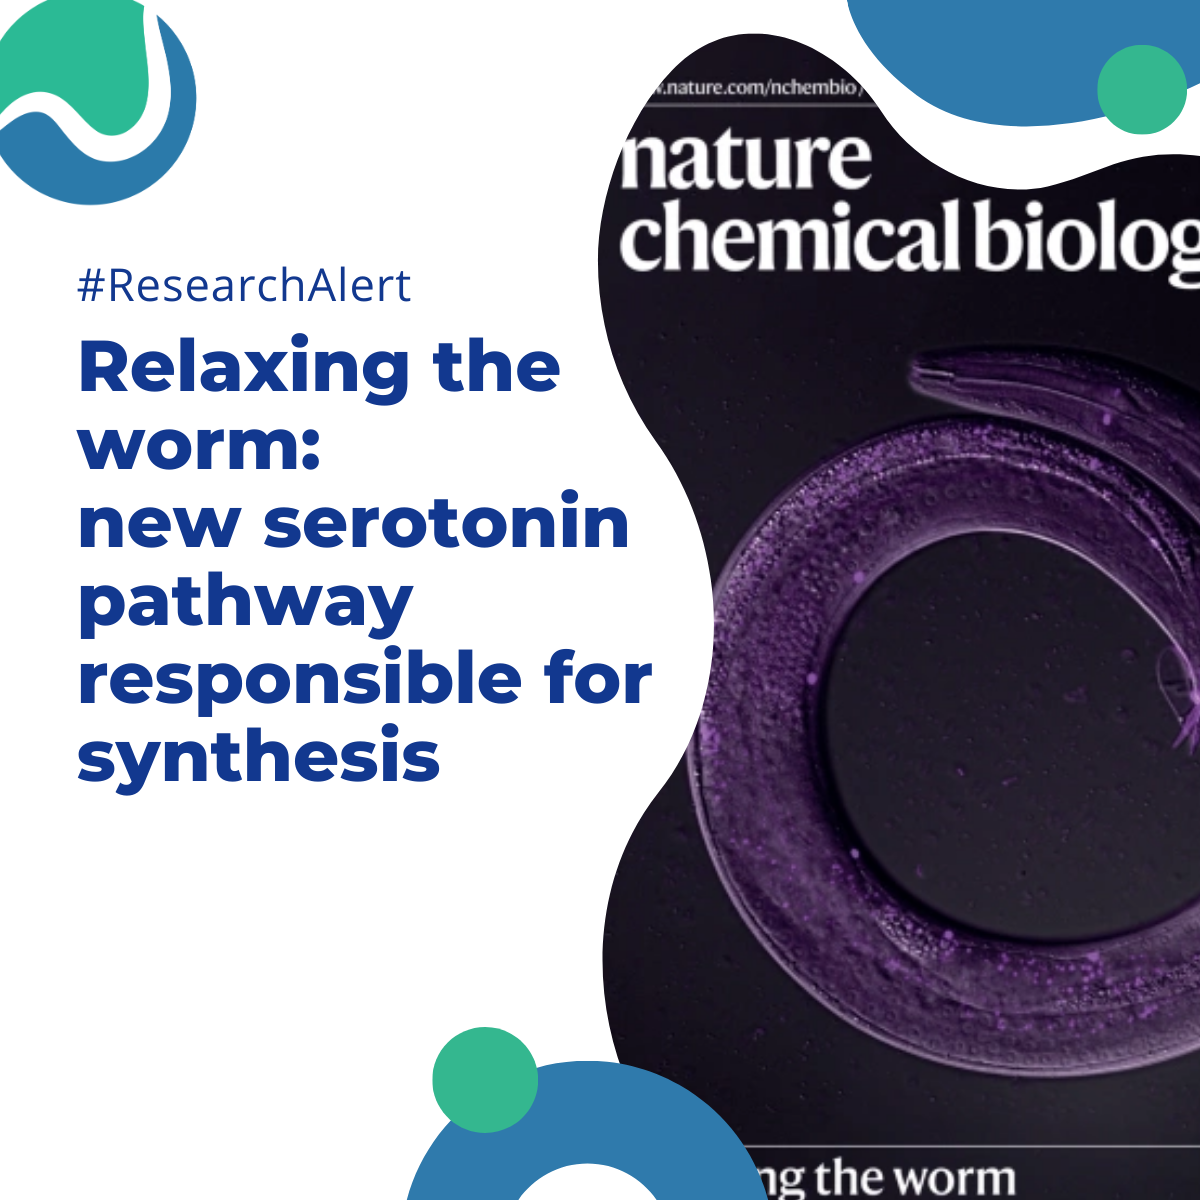 #ResearchAlert Relaxing the worm: new serotonin pathway responsible for synthesis